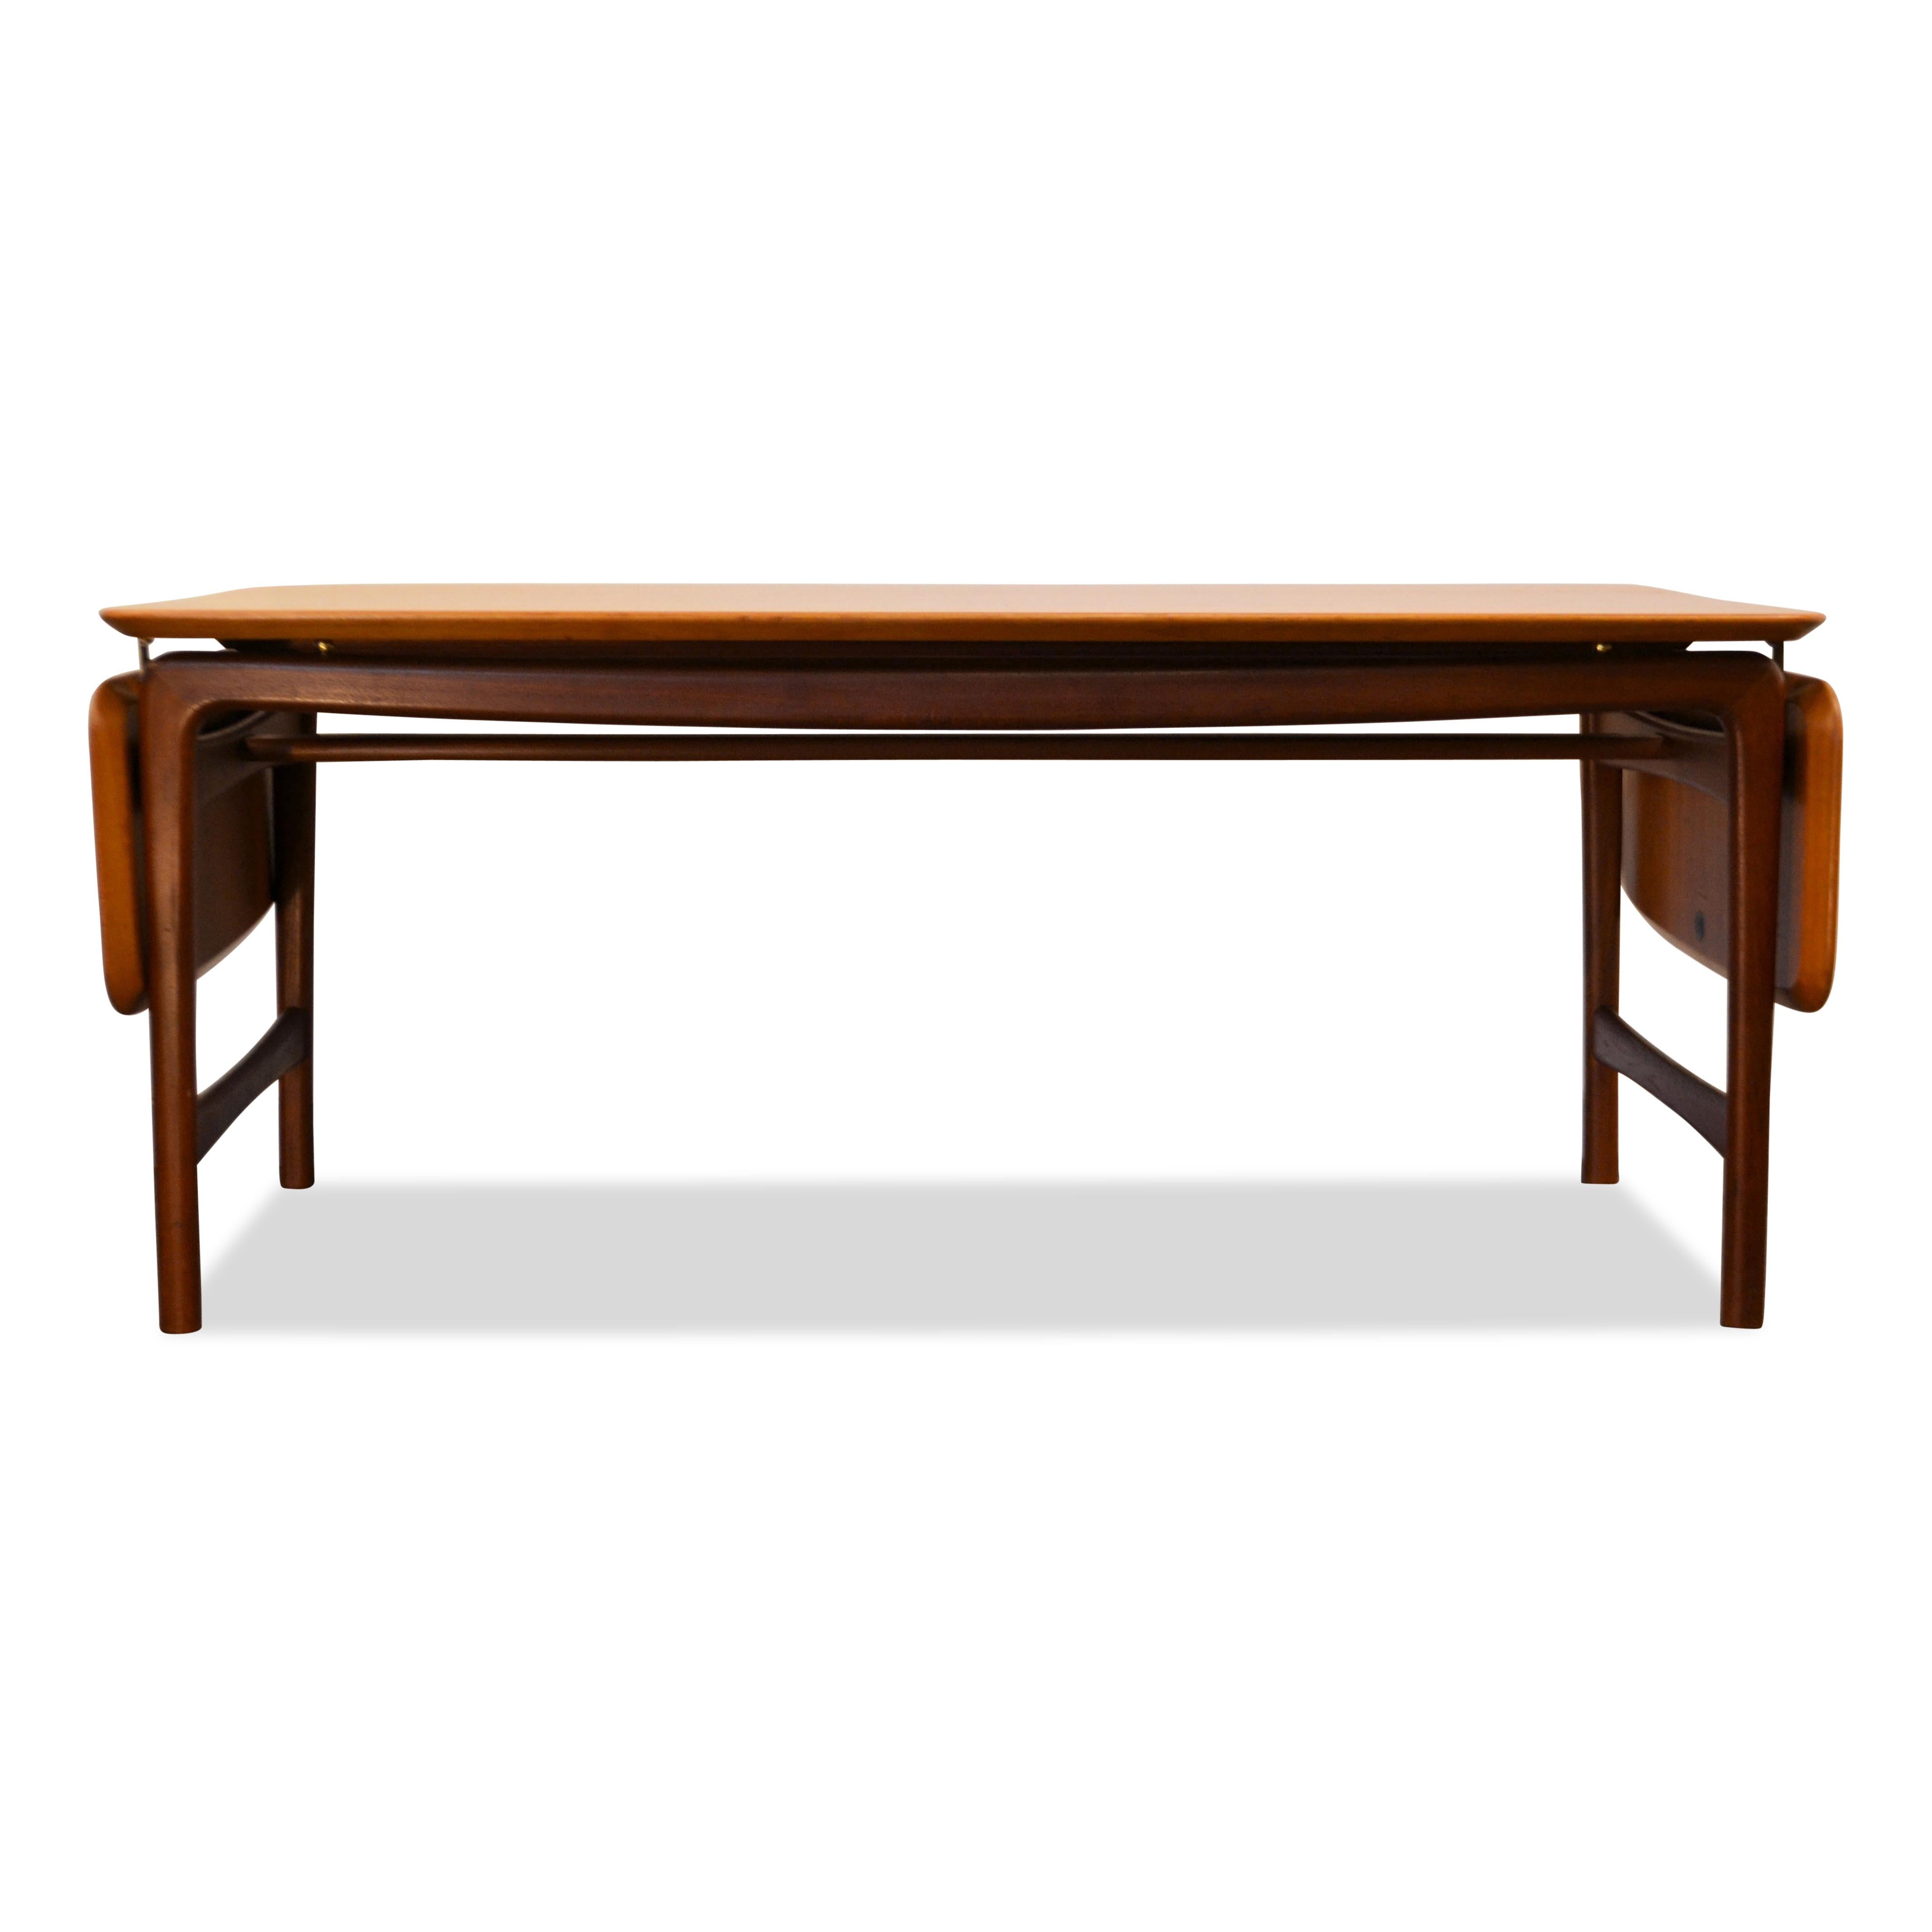 Vintage solid teak table designed by the famous Danish designer duo Peter Hvidt & Orla Mølgaard-Nielsen for France & Daverkosen. This high-end model 15/54 design table features a typical mid-century Danish design, gorgeous solid teak wood, messing